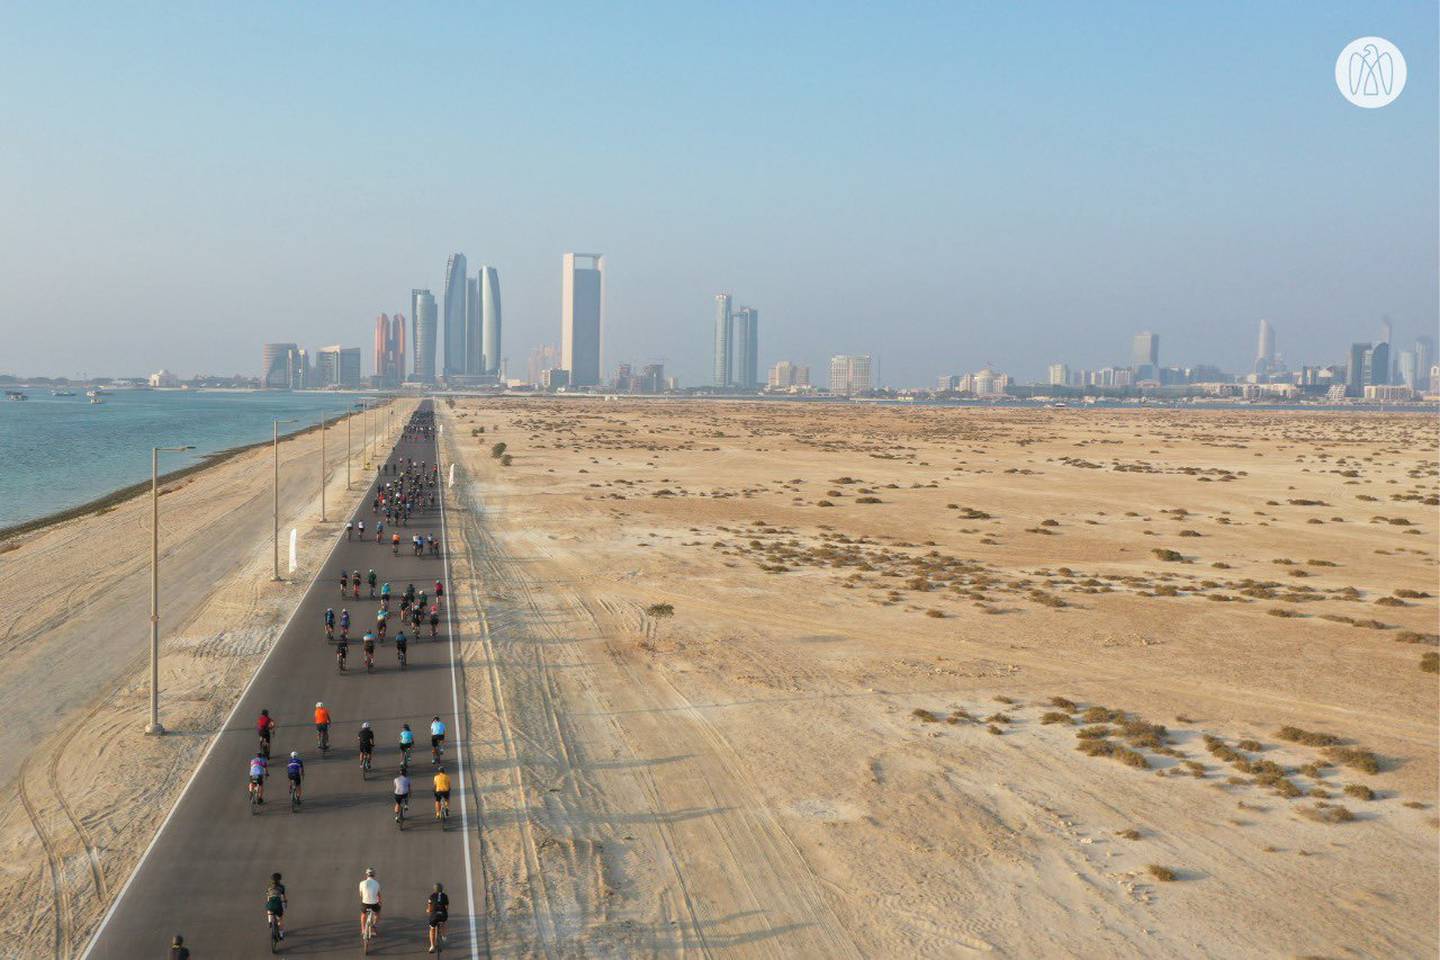 New cycling facilities and competitions for amateurs and professionals were announced at the event on Tuesday. Photo: Abu Dhabi Media Twitter
